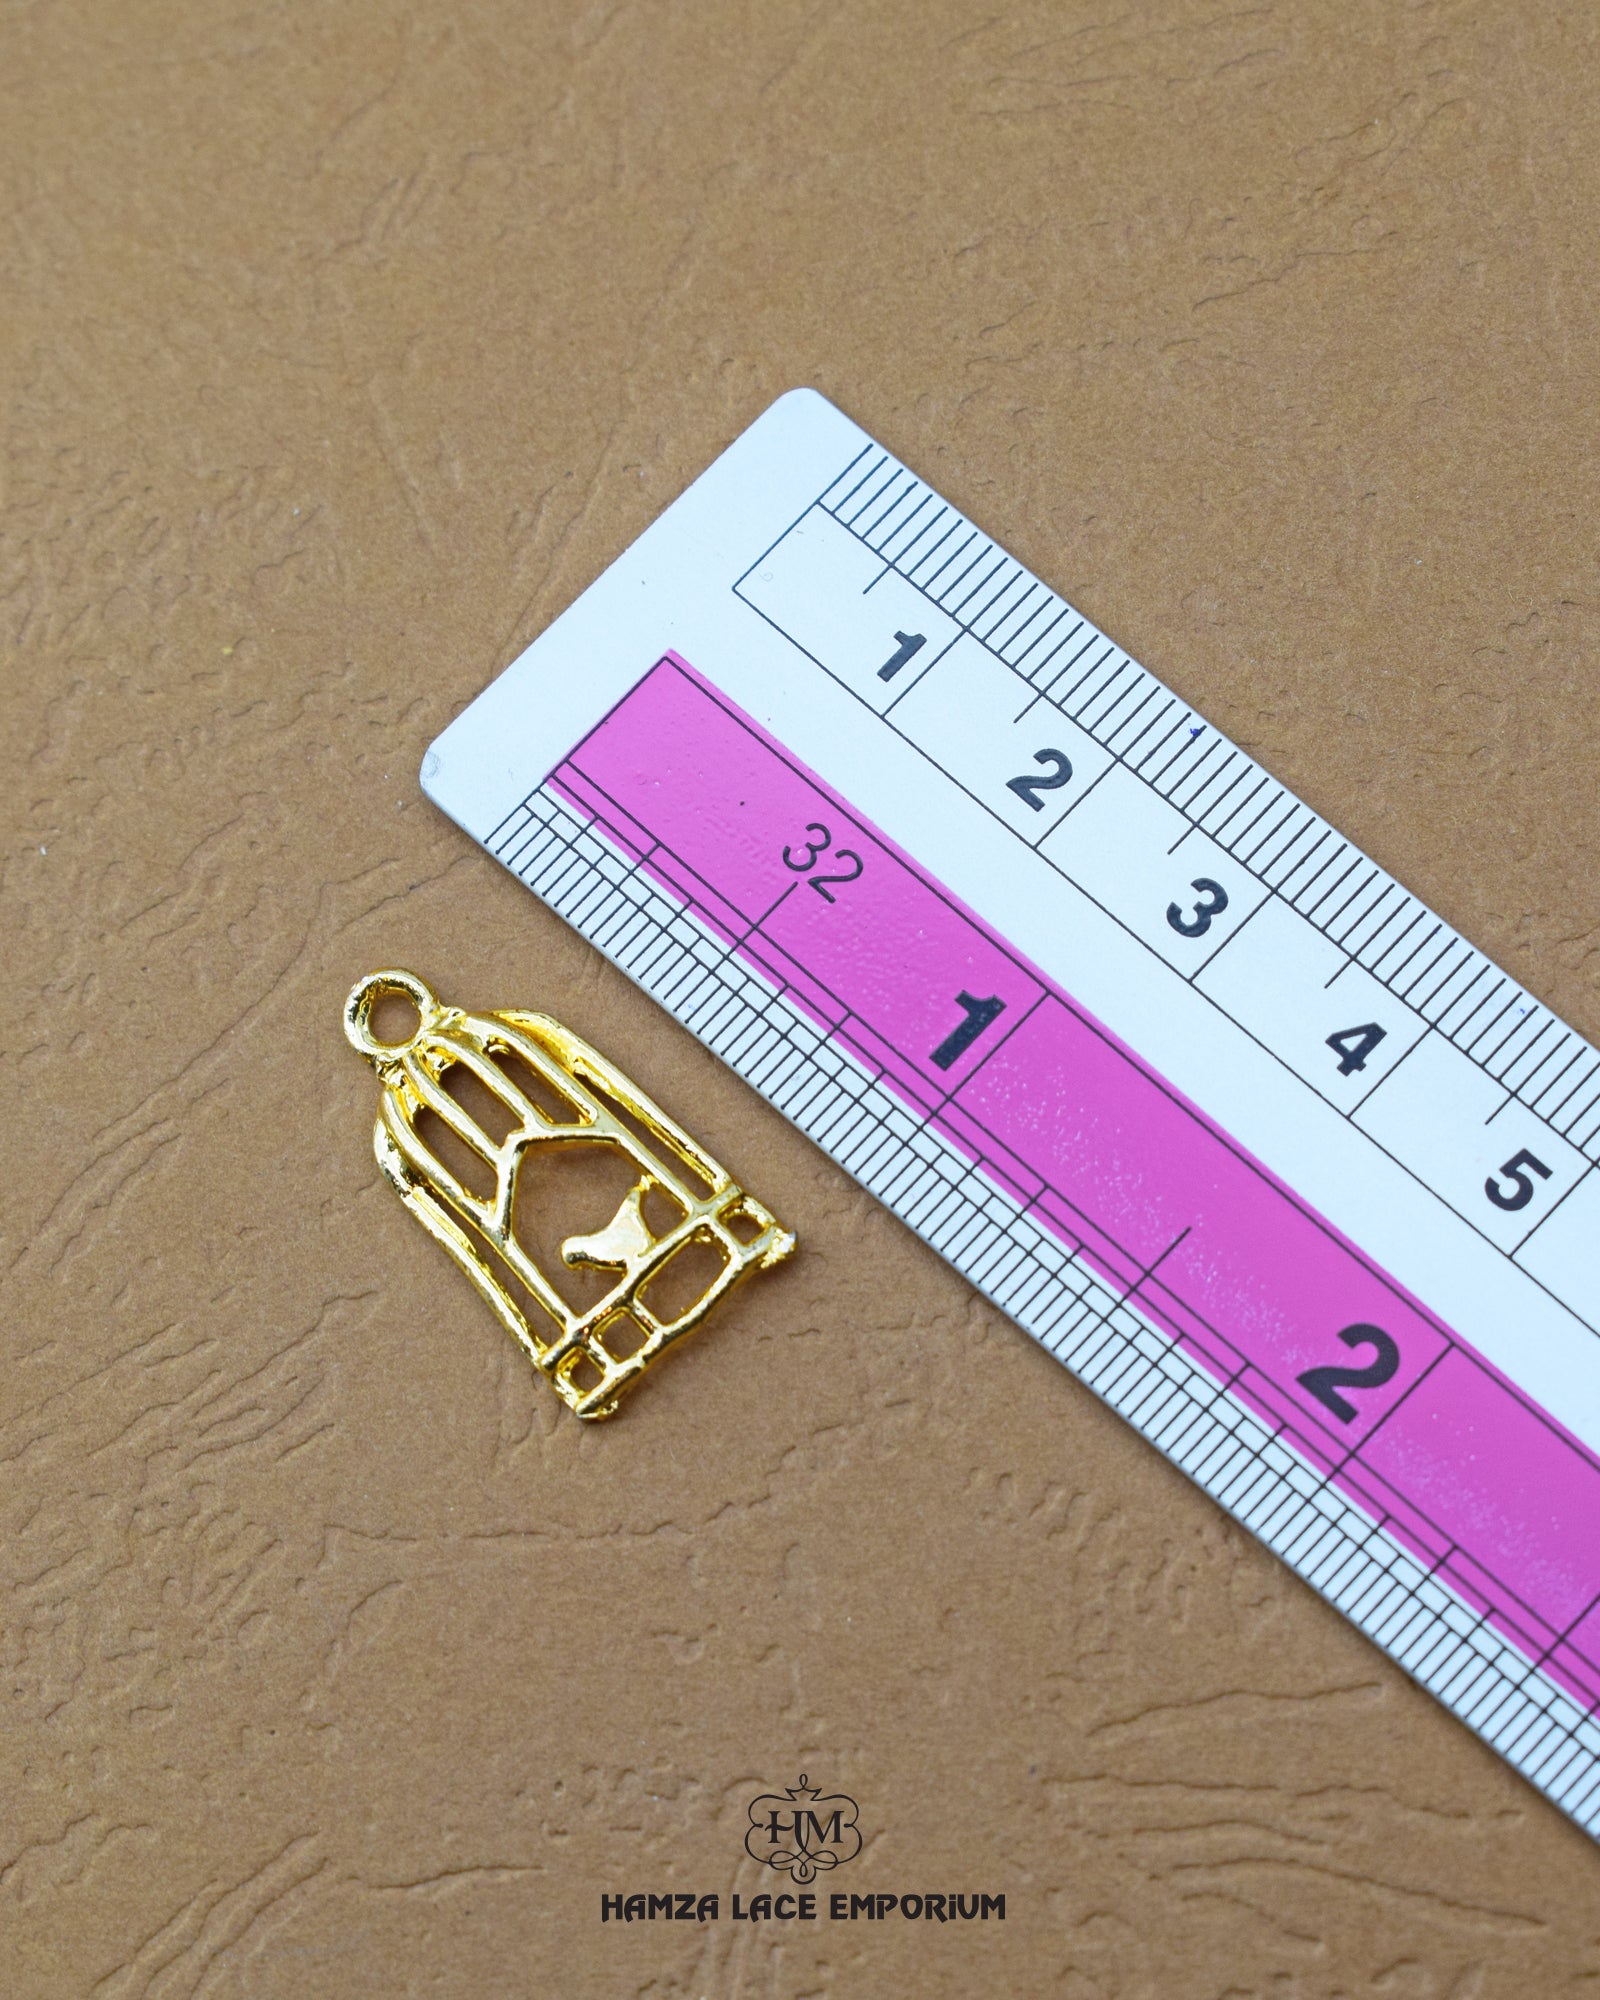 The size of the 'Cage Design Button MA183' is indicated using a ruler.